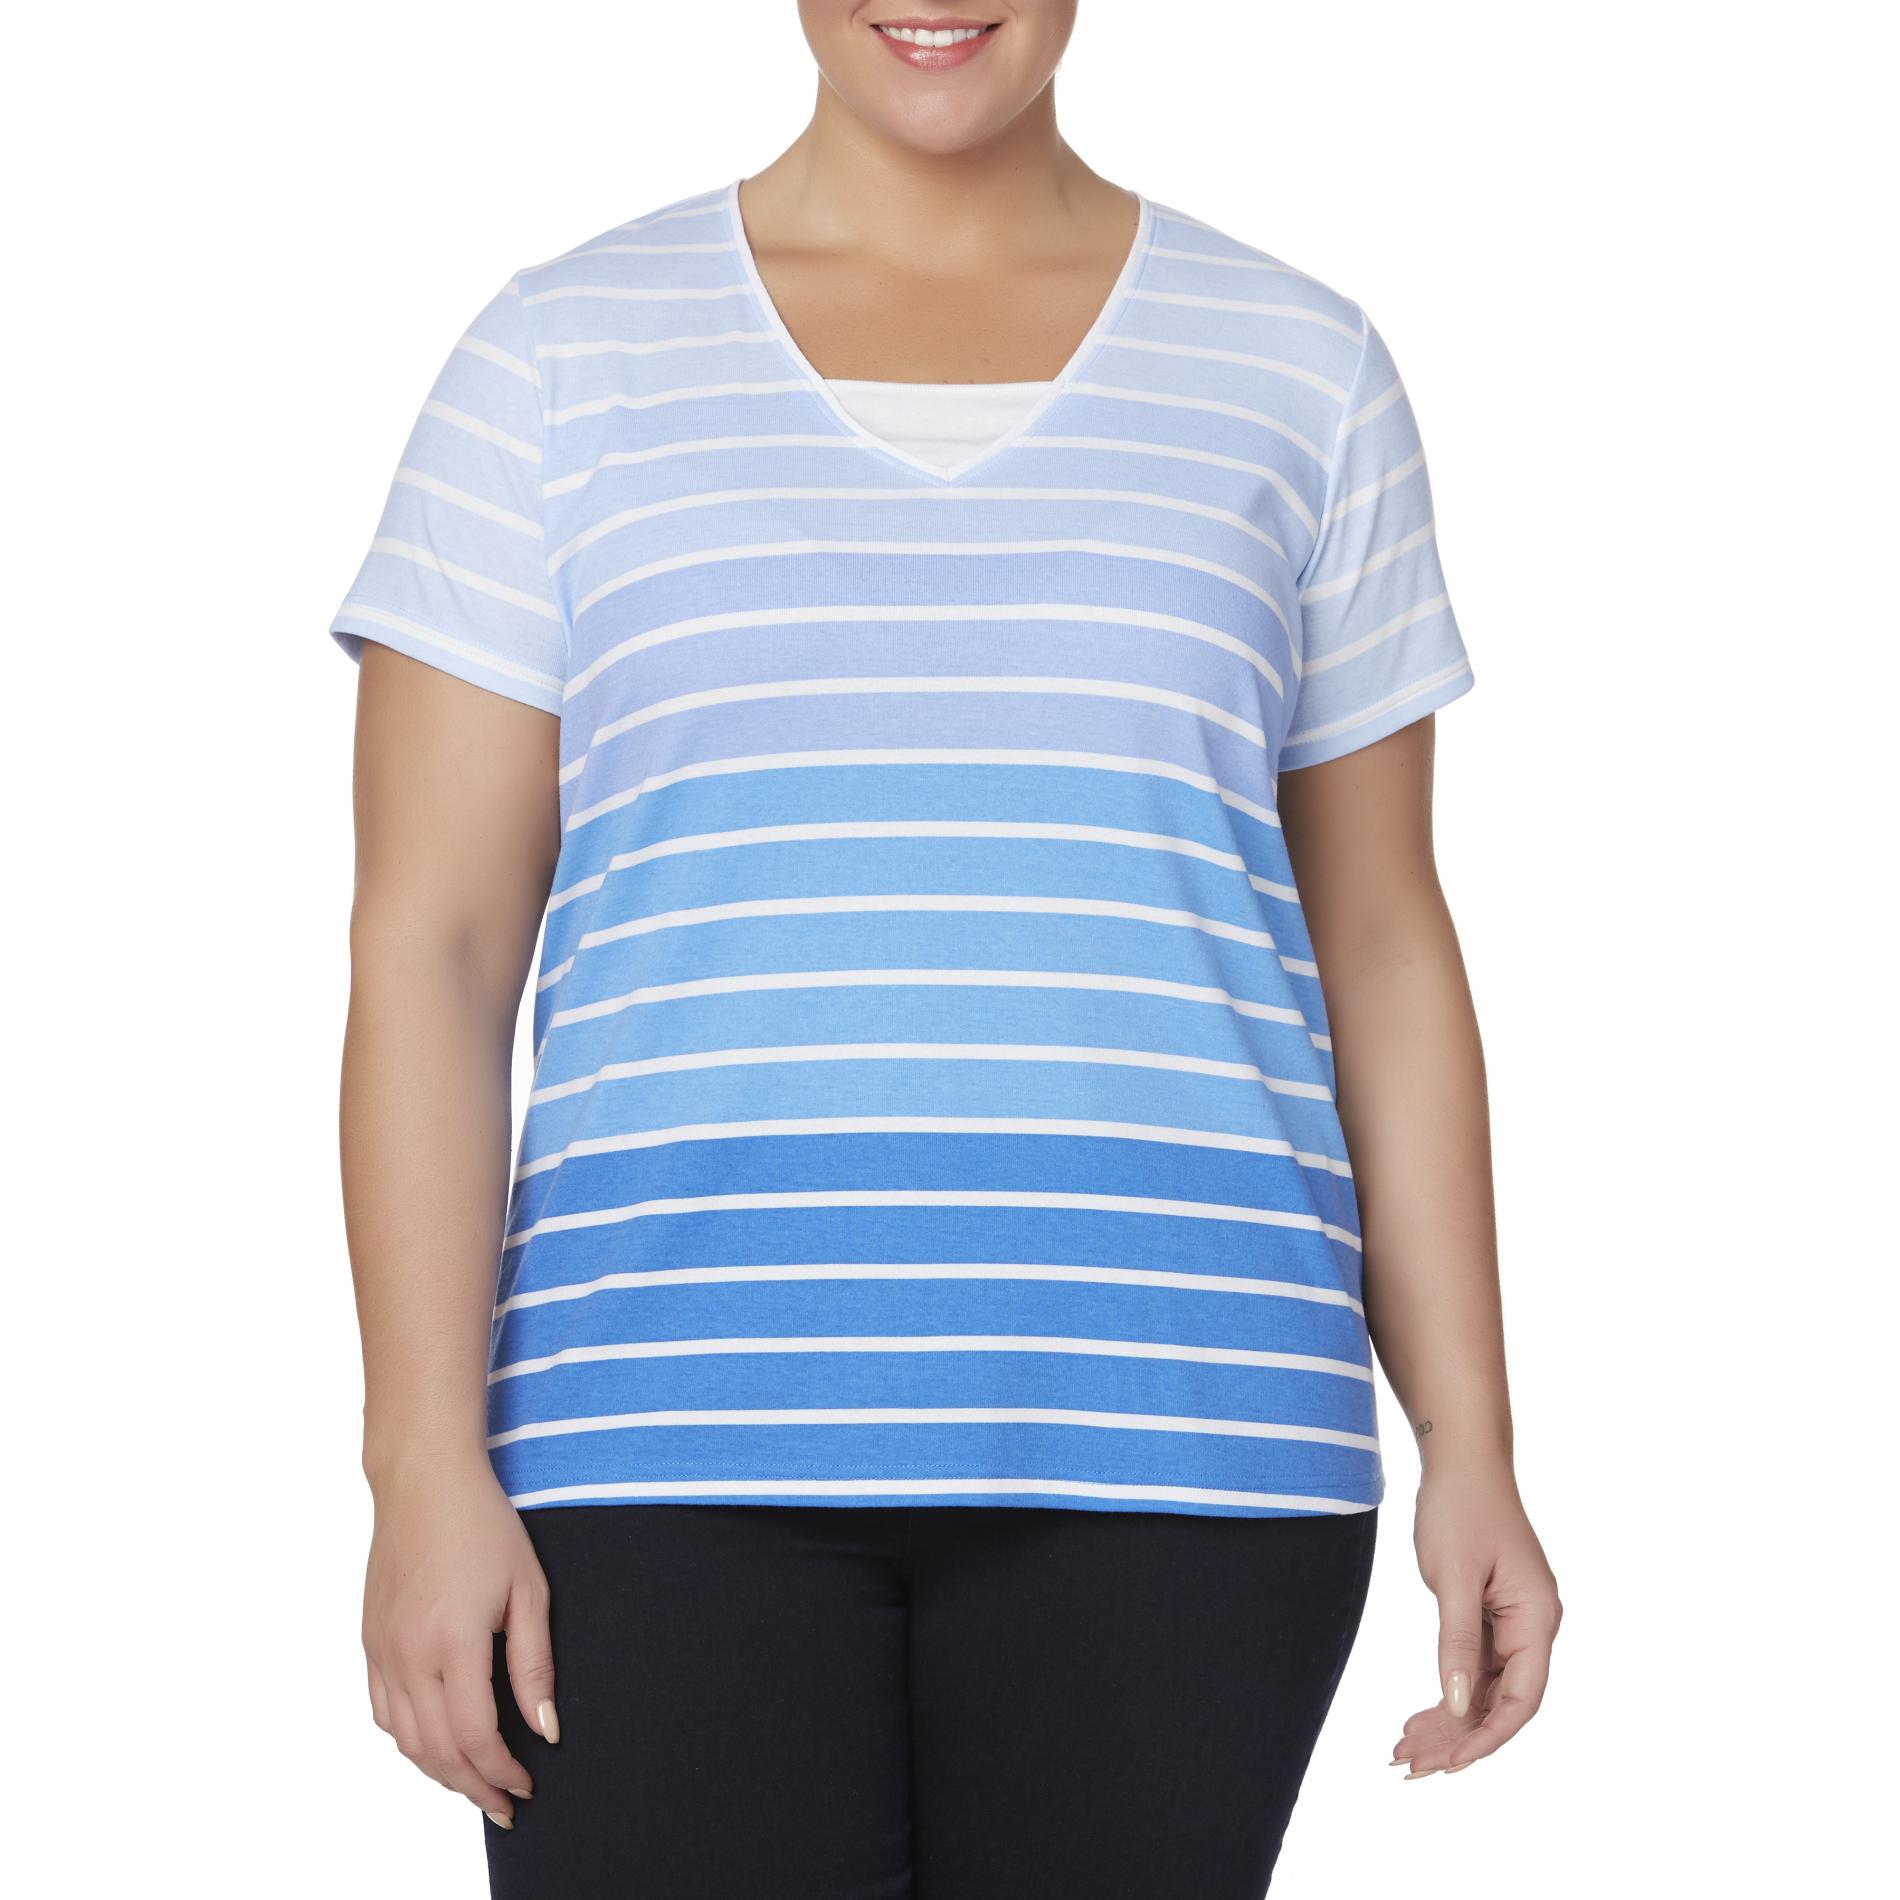 Basic Editions Women's Plus Layered-Look T-Shirt - Striped